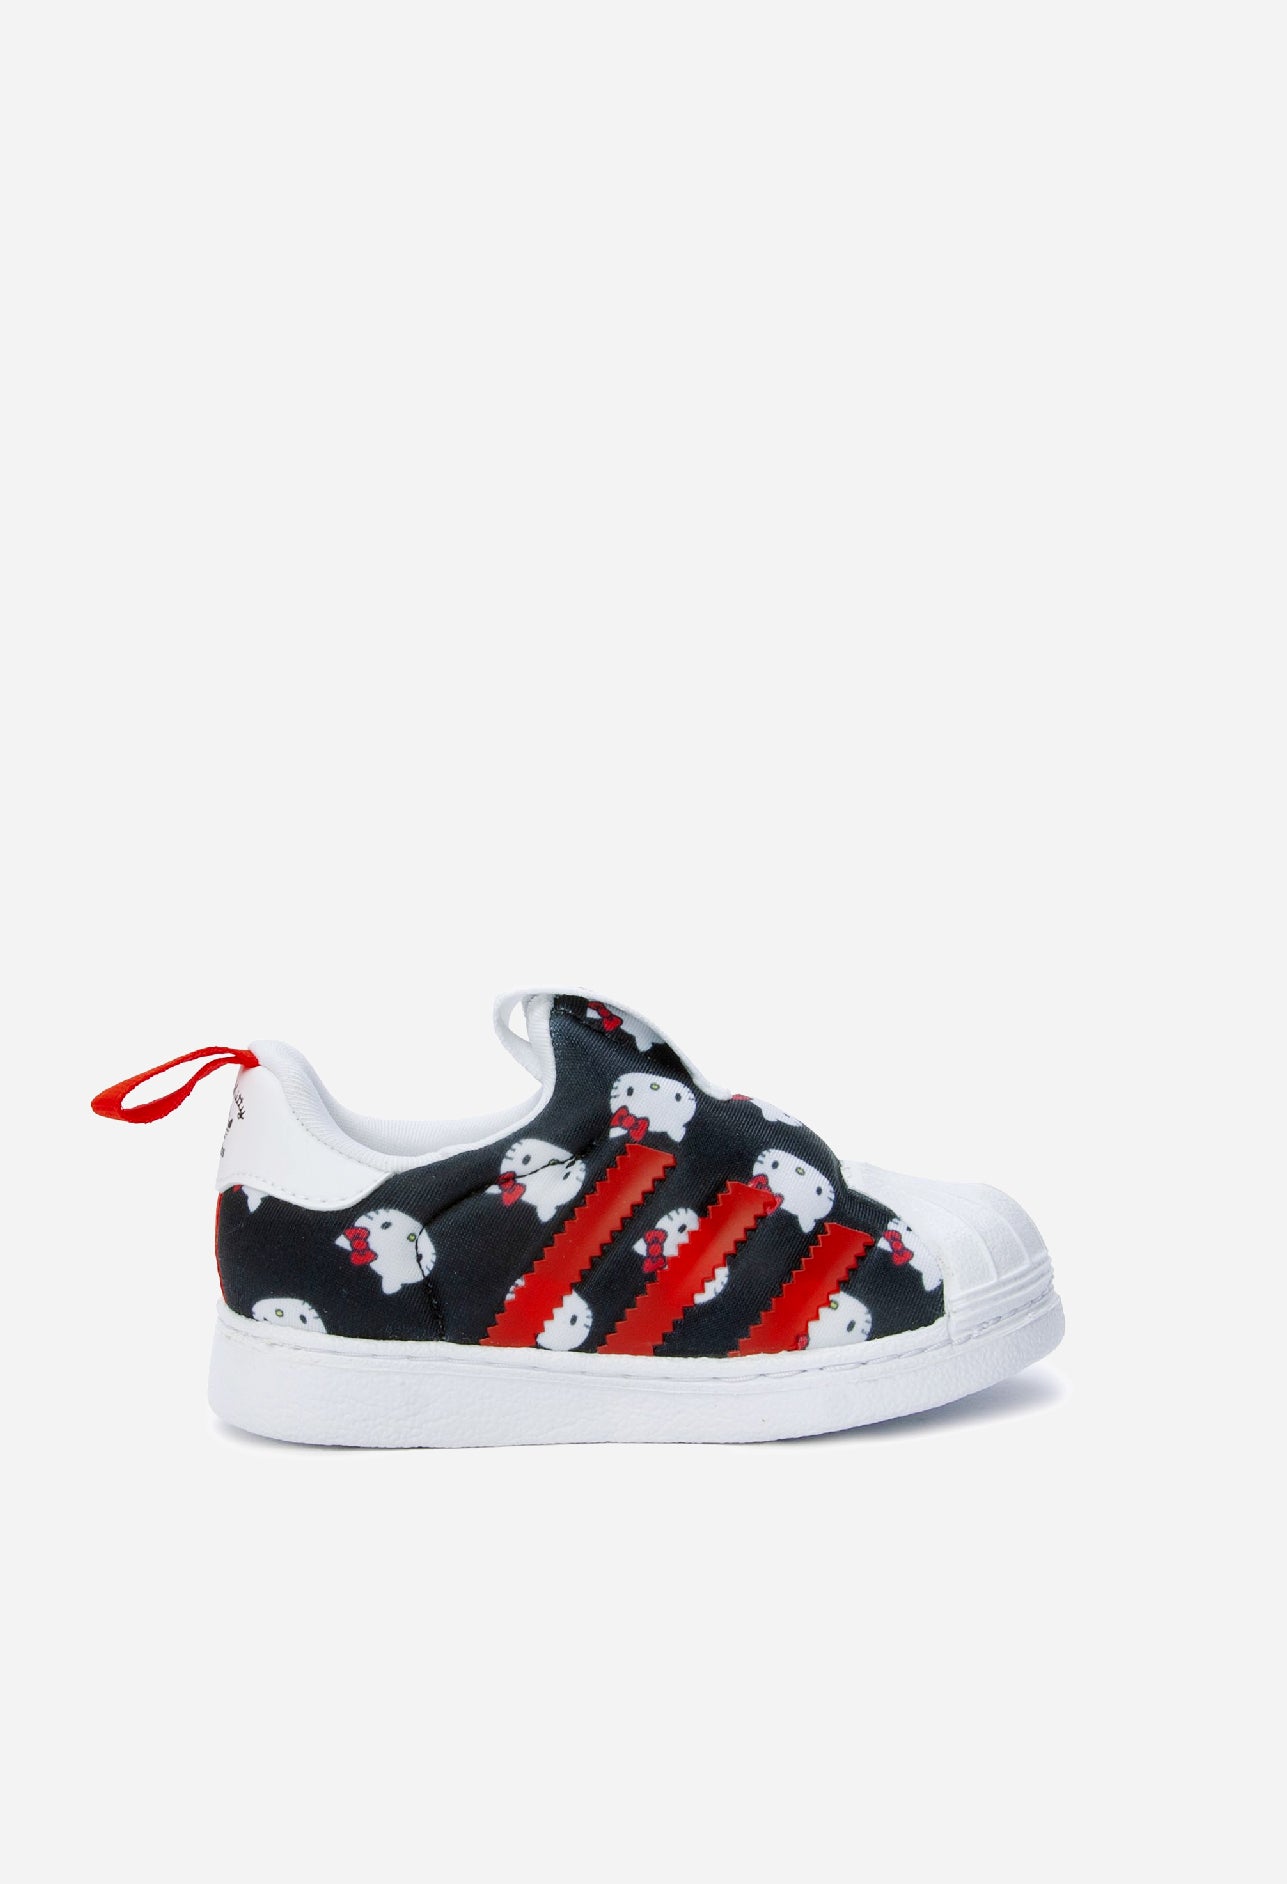 Adidas Hello Kitty Superstar 360 Shoes (TD)